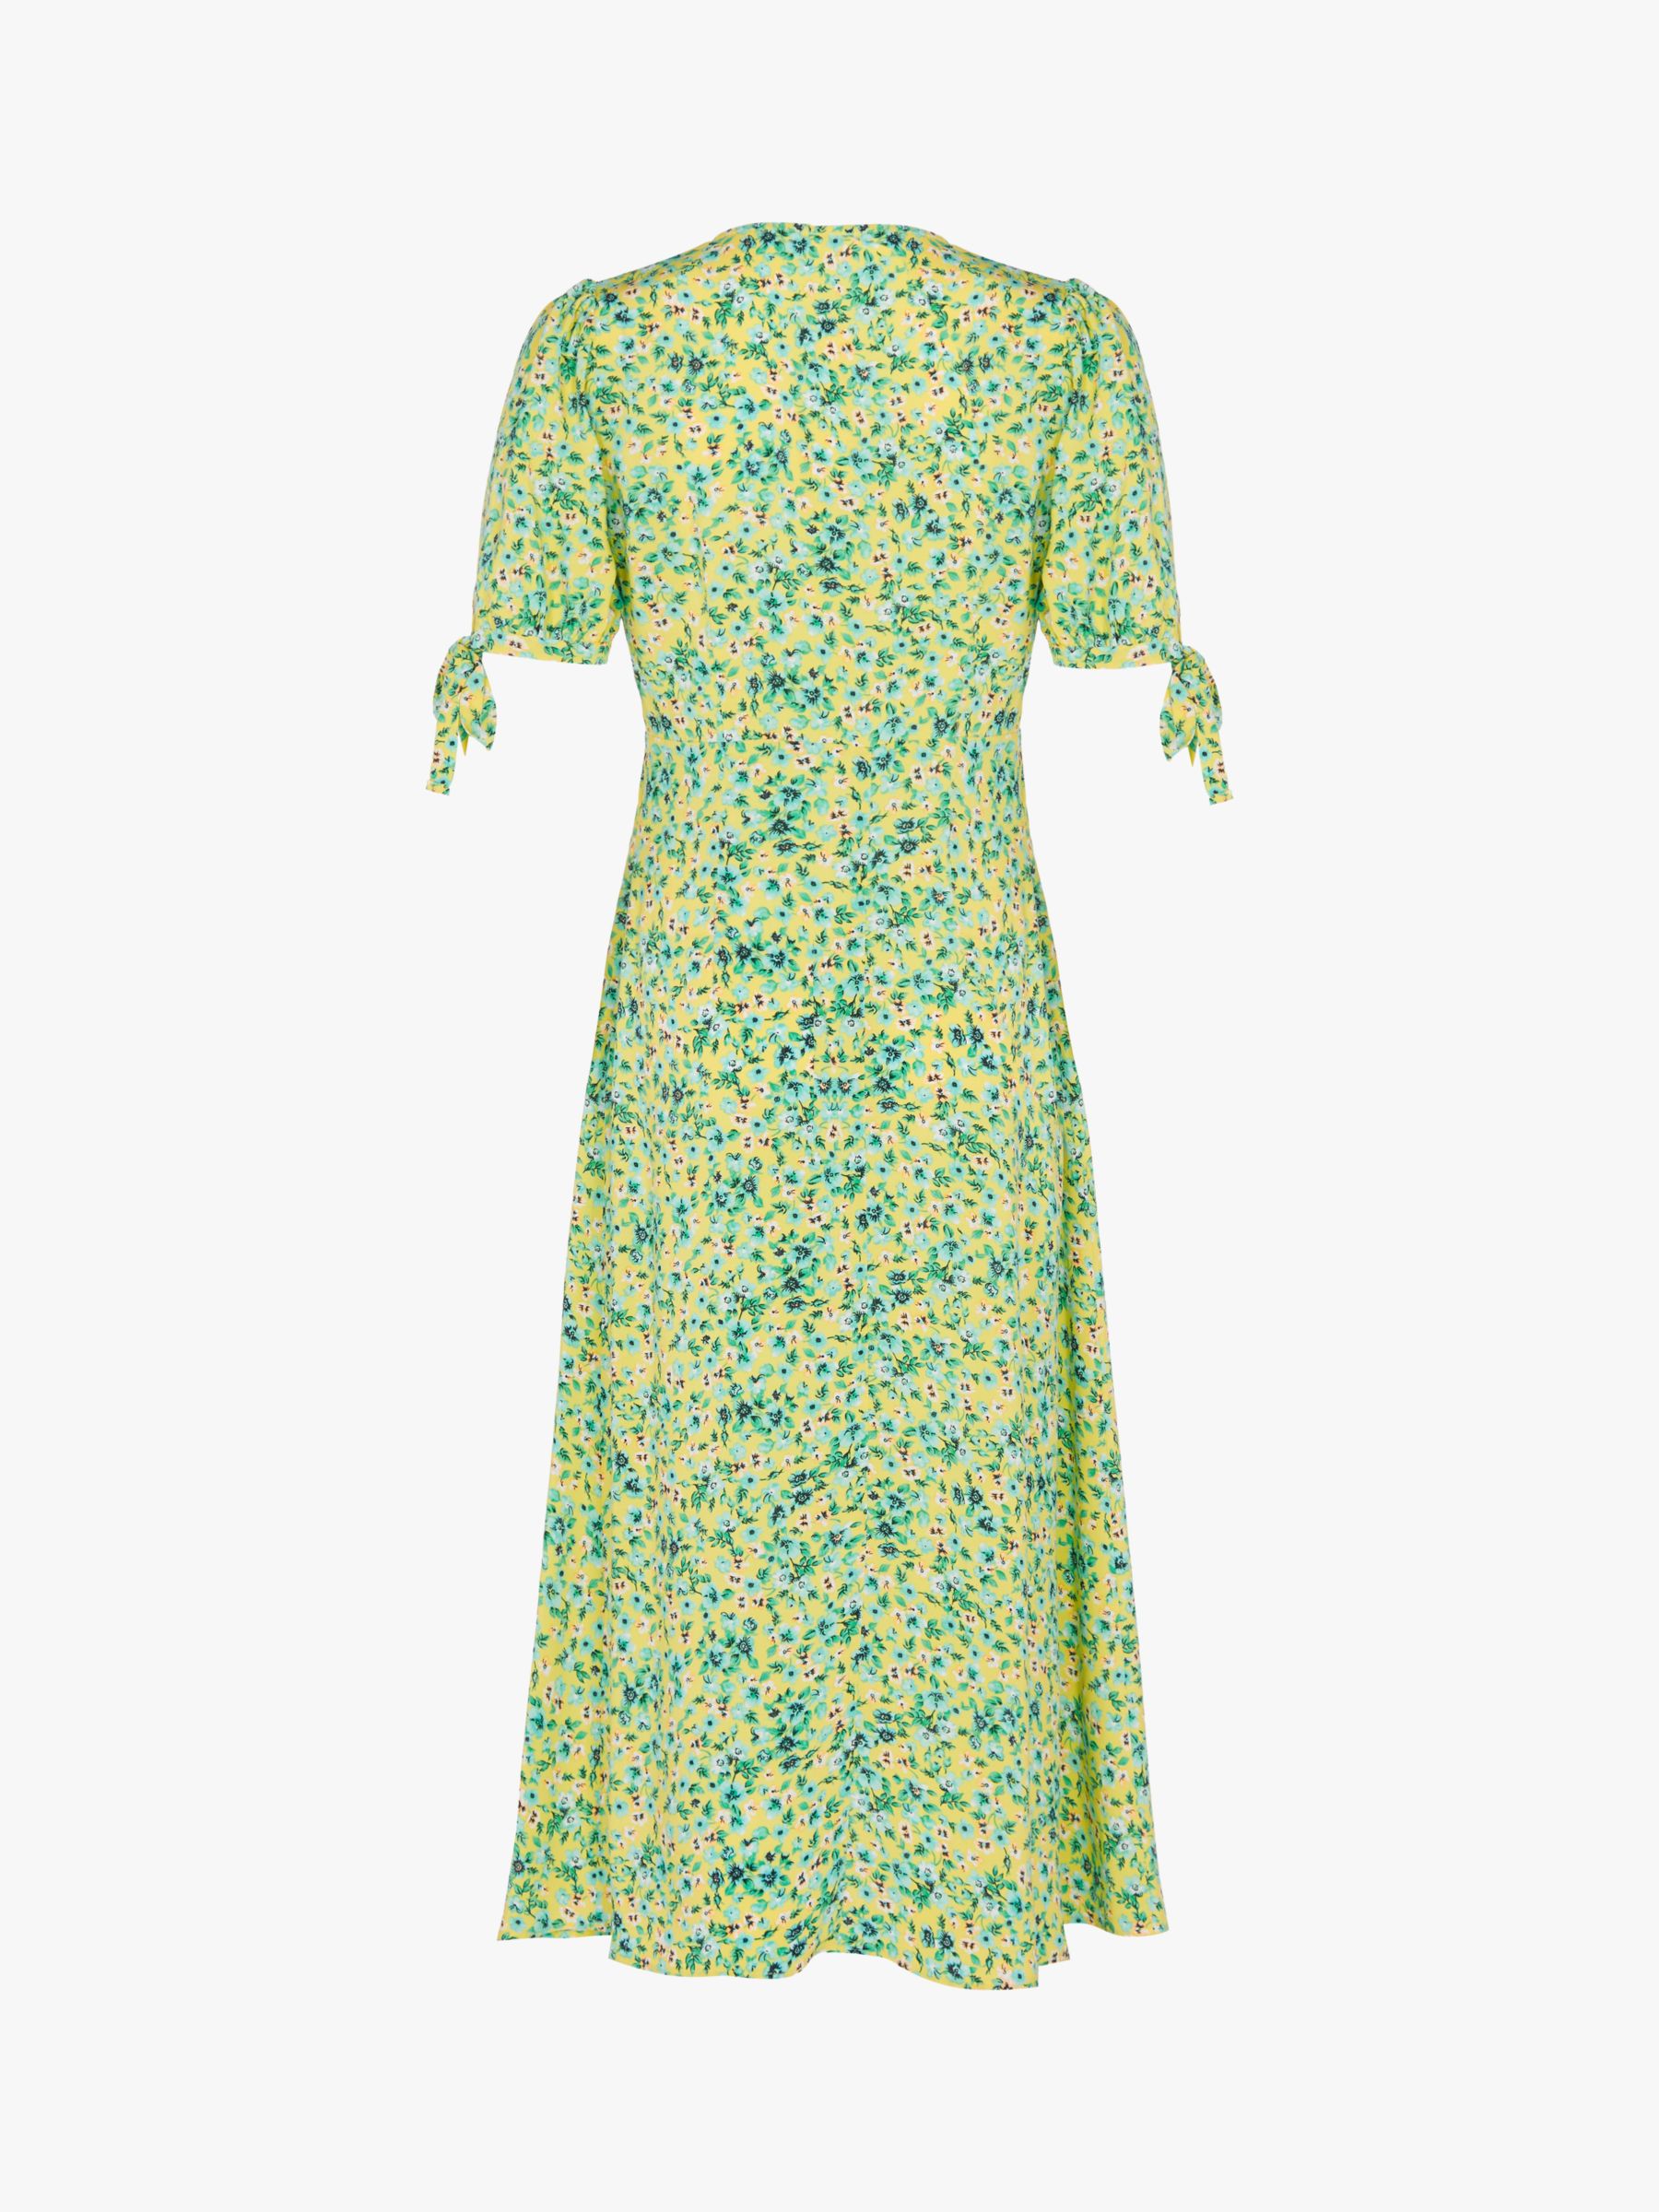 Finery Claire Sweet Pea Ditsy Print Dress, Green